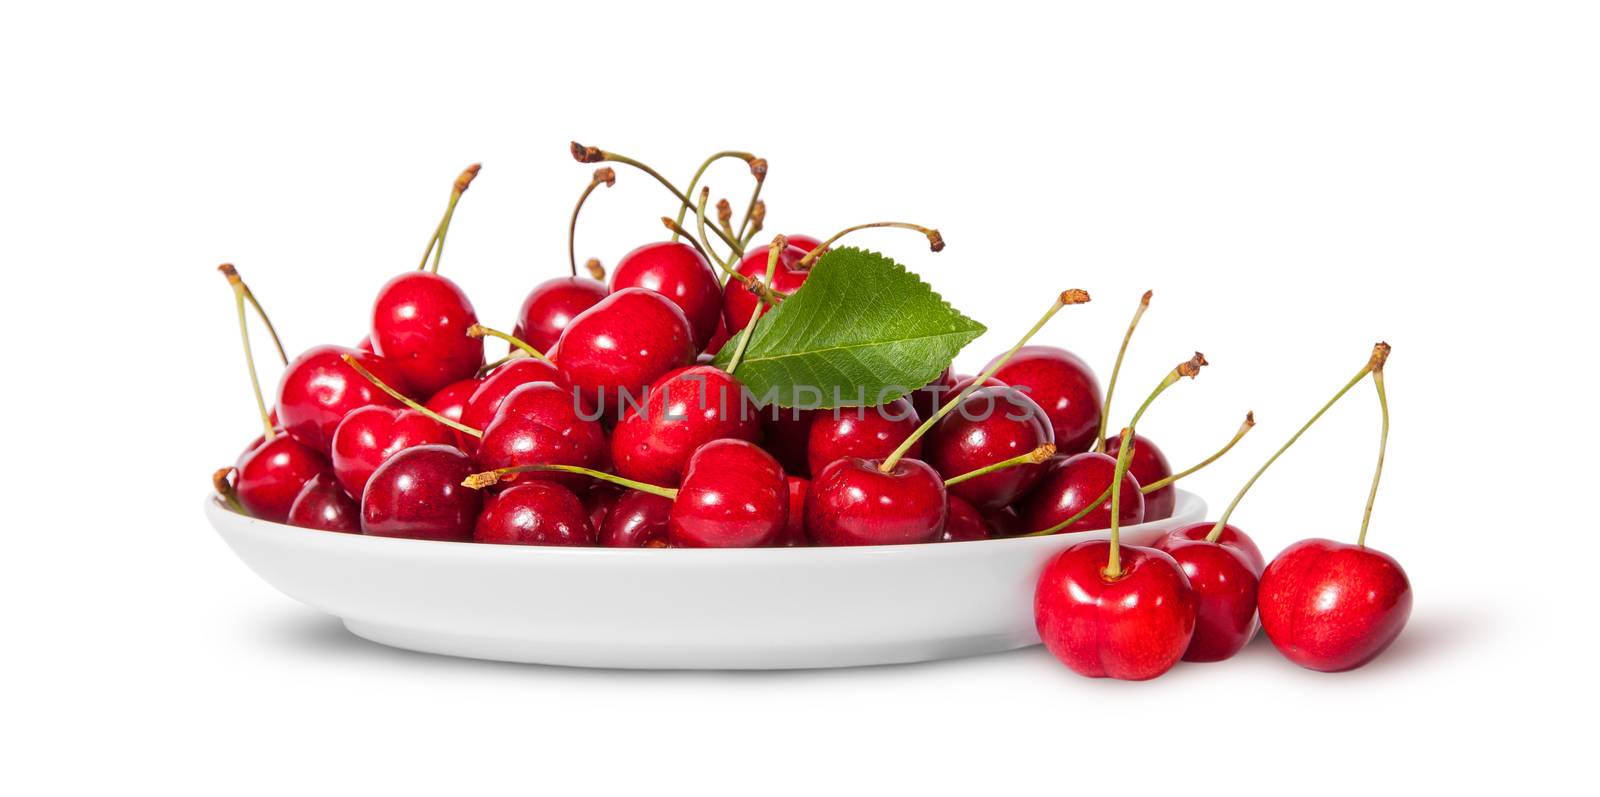 Sweet cherries with leaf on white plate and three near by Cipariss